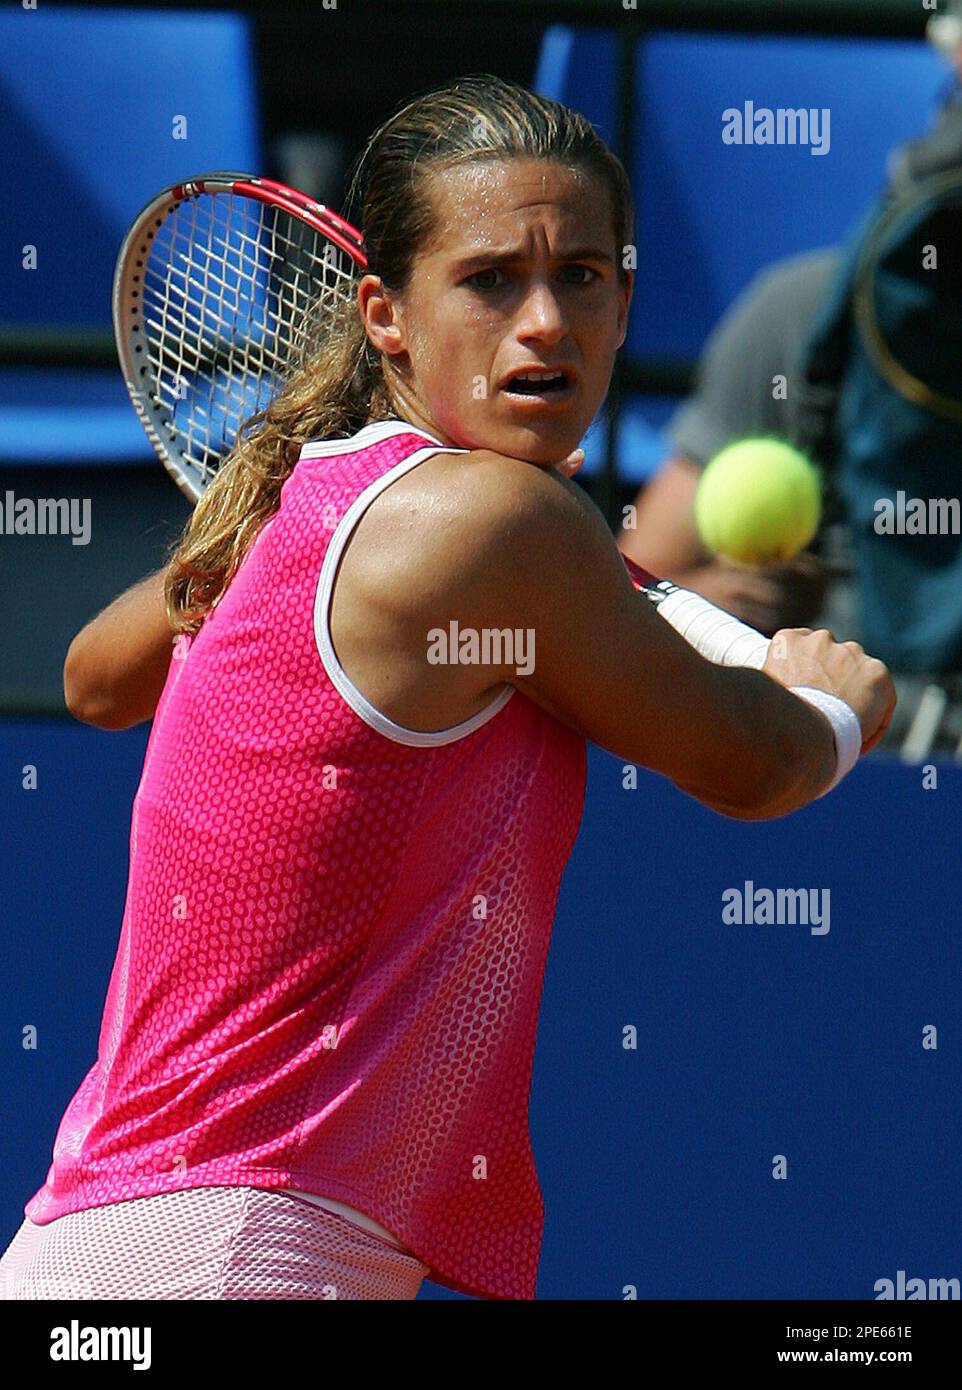 Amelie Mauresmo of France returns a ball to Silvia Farina of Italy during  their match at the Italian Open tennis tournament in Rome's Foro Italico  sports complex, Thursday, May 12, 2005. (AP